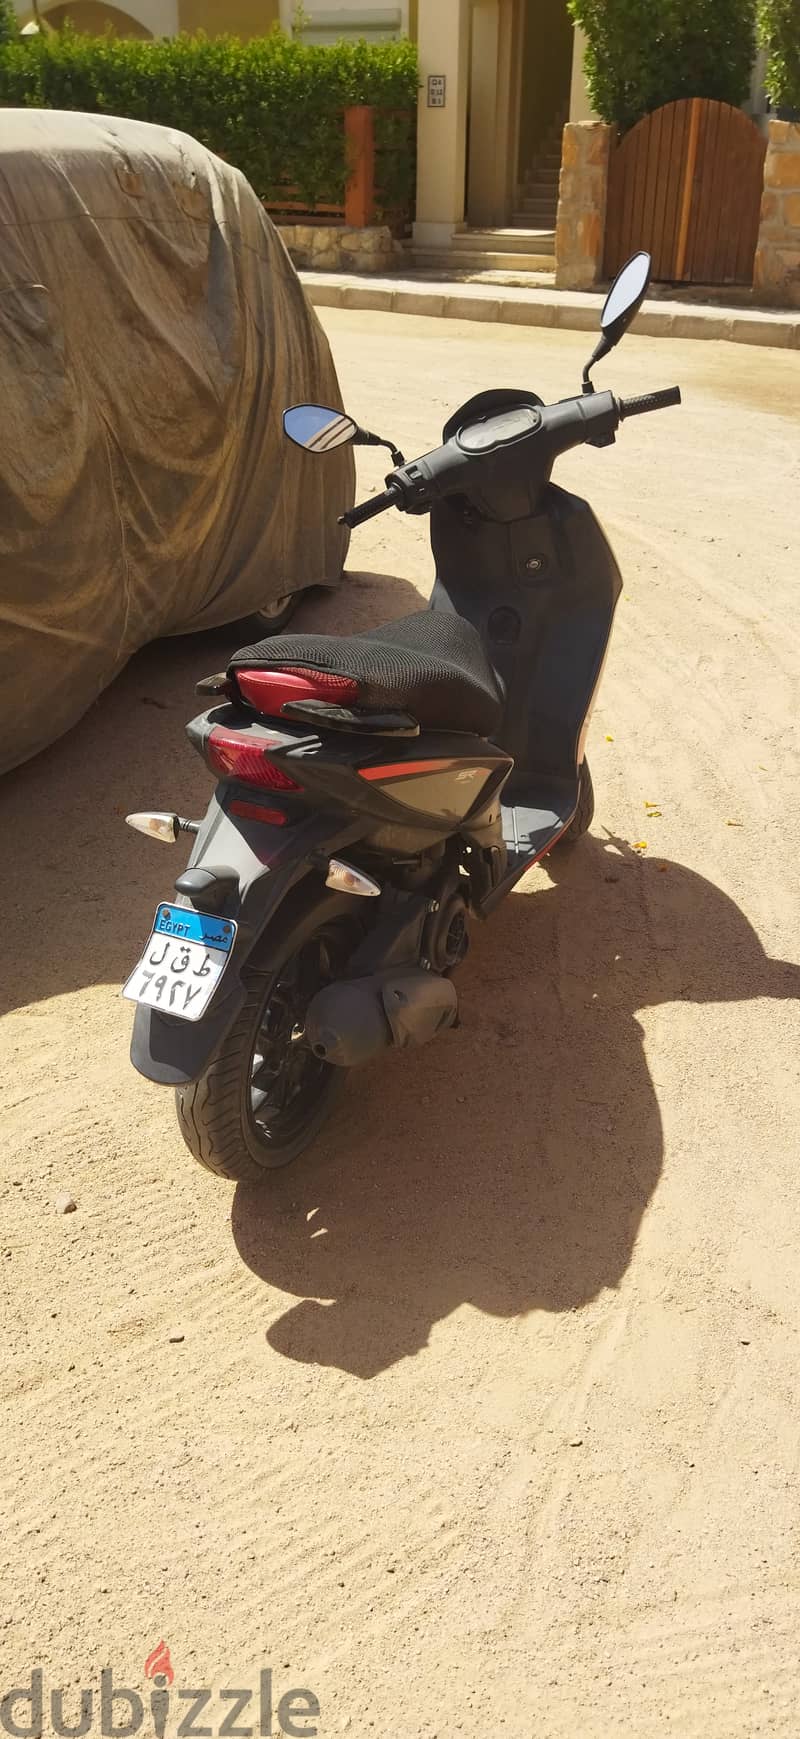 Aprilia SR 150 only 4249km (four Thousand two hundred and forty nine) 2